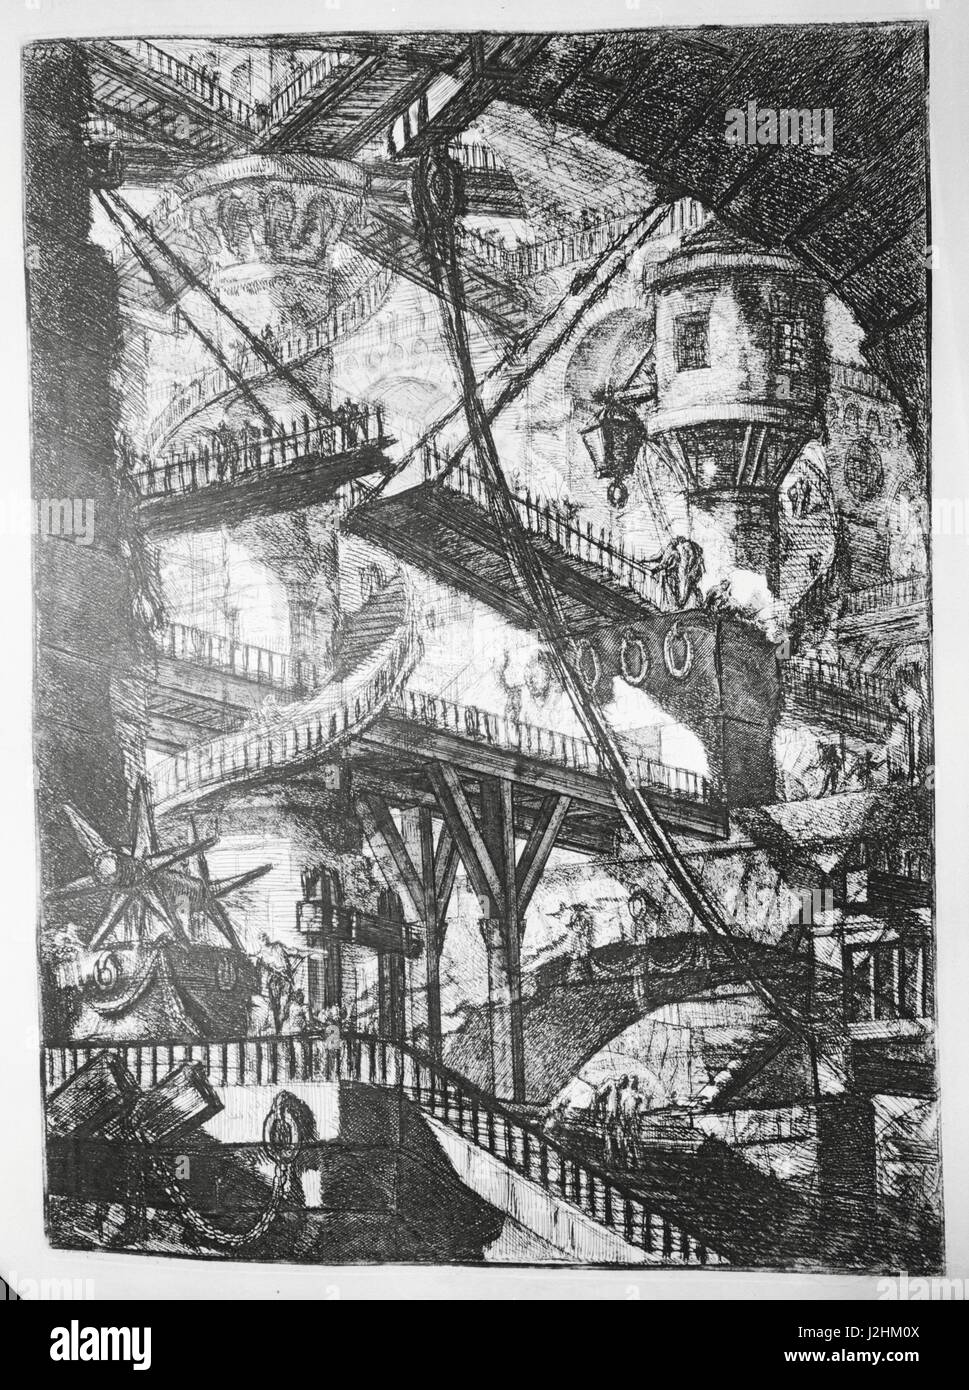 The Imaginary Prisons (Carceri d'invenzione), second version of the series of engravings by Giovanni Battista Piranesi, published in 1761.  Plate VII: The Drawbridge  Private collection Stock Photo